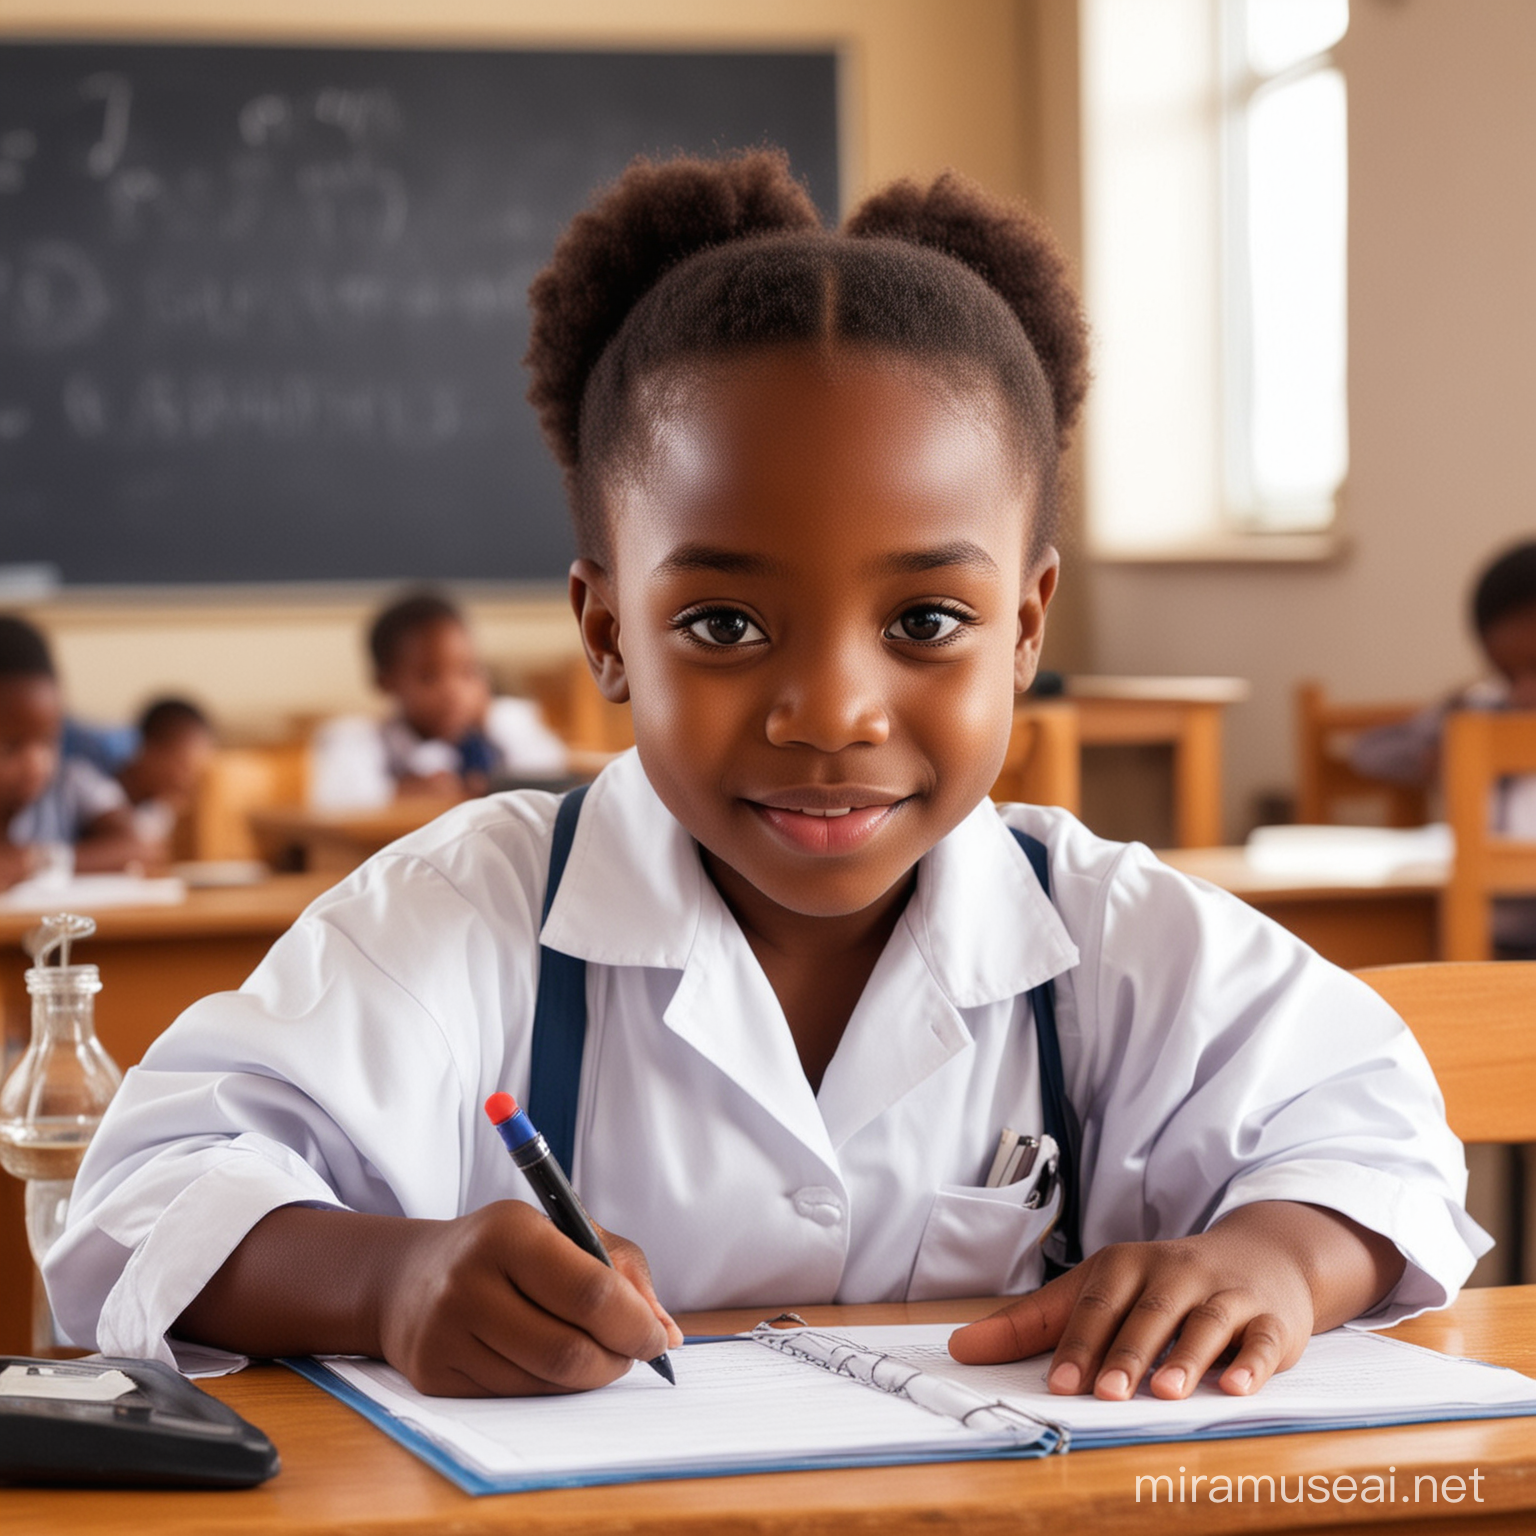 African American Little Girl Engaged in Scientific Learning at School